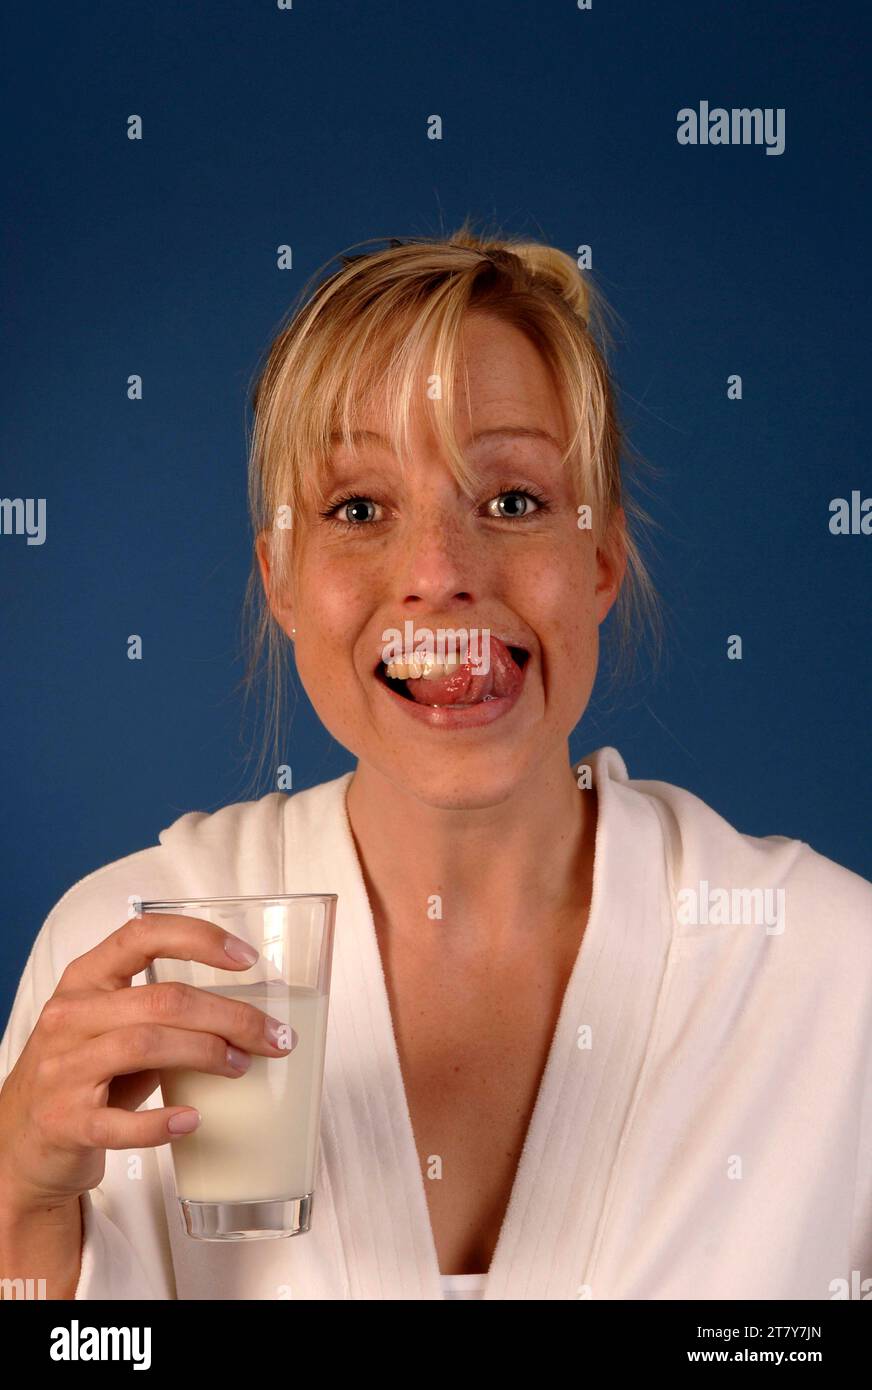 Junge Frau trinkt ein Glas Milch, BLF *** Young woman drinking a glass of milk, BLF 07000008 xH Stock Photo